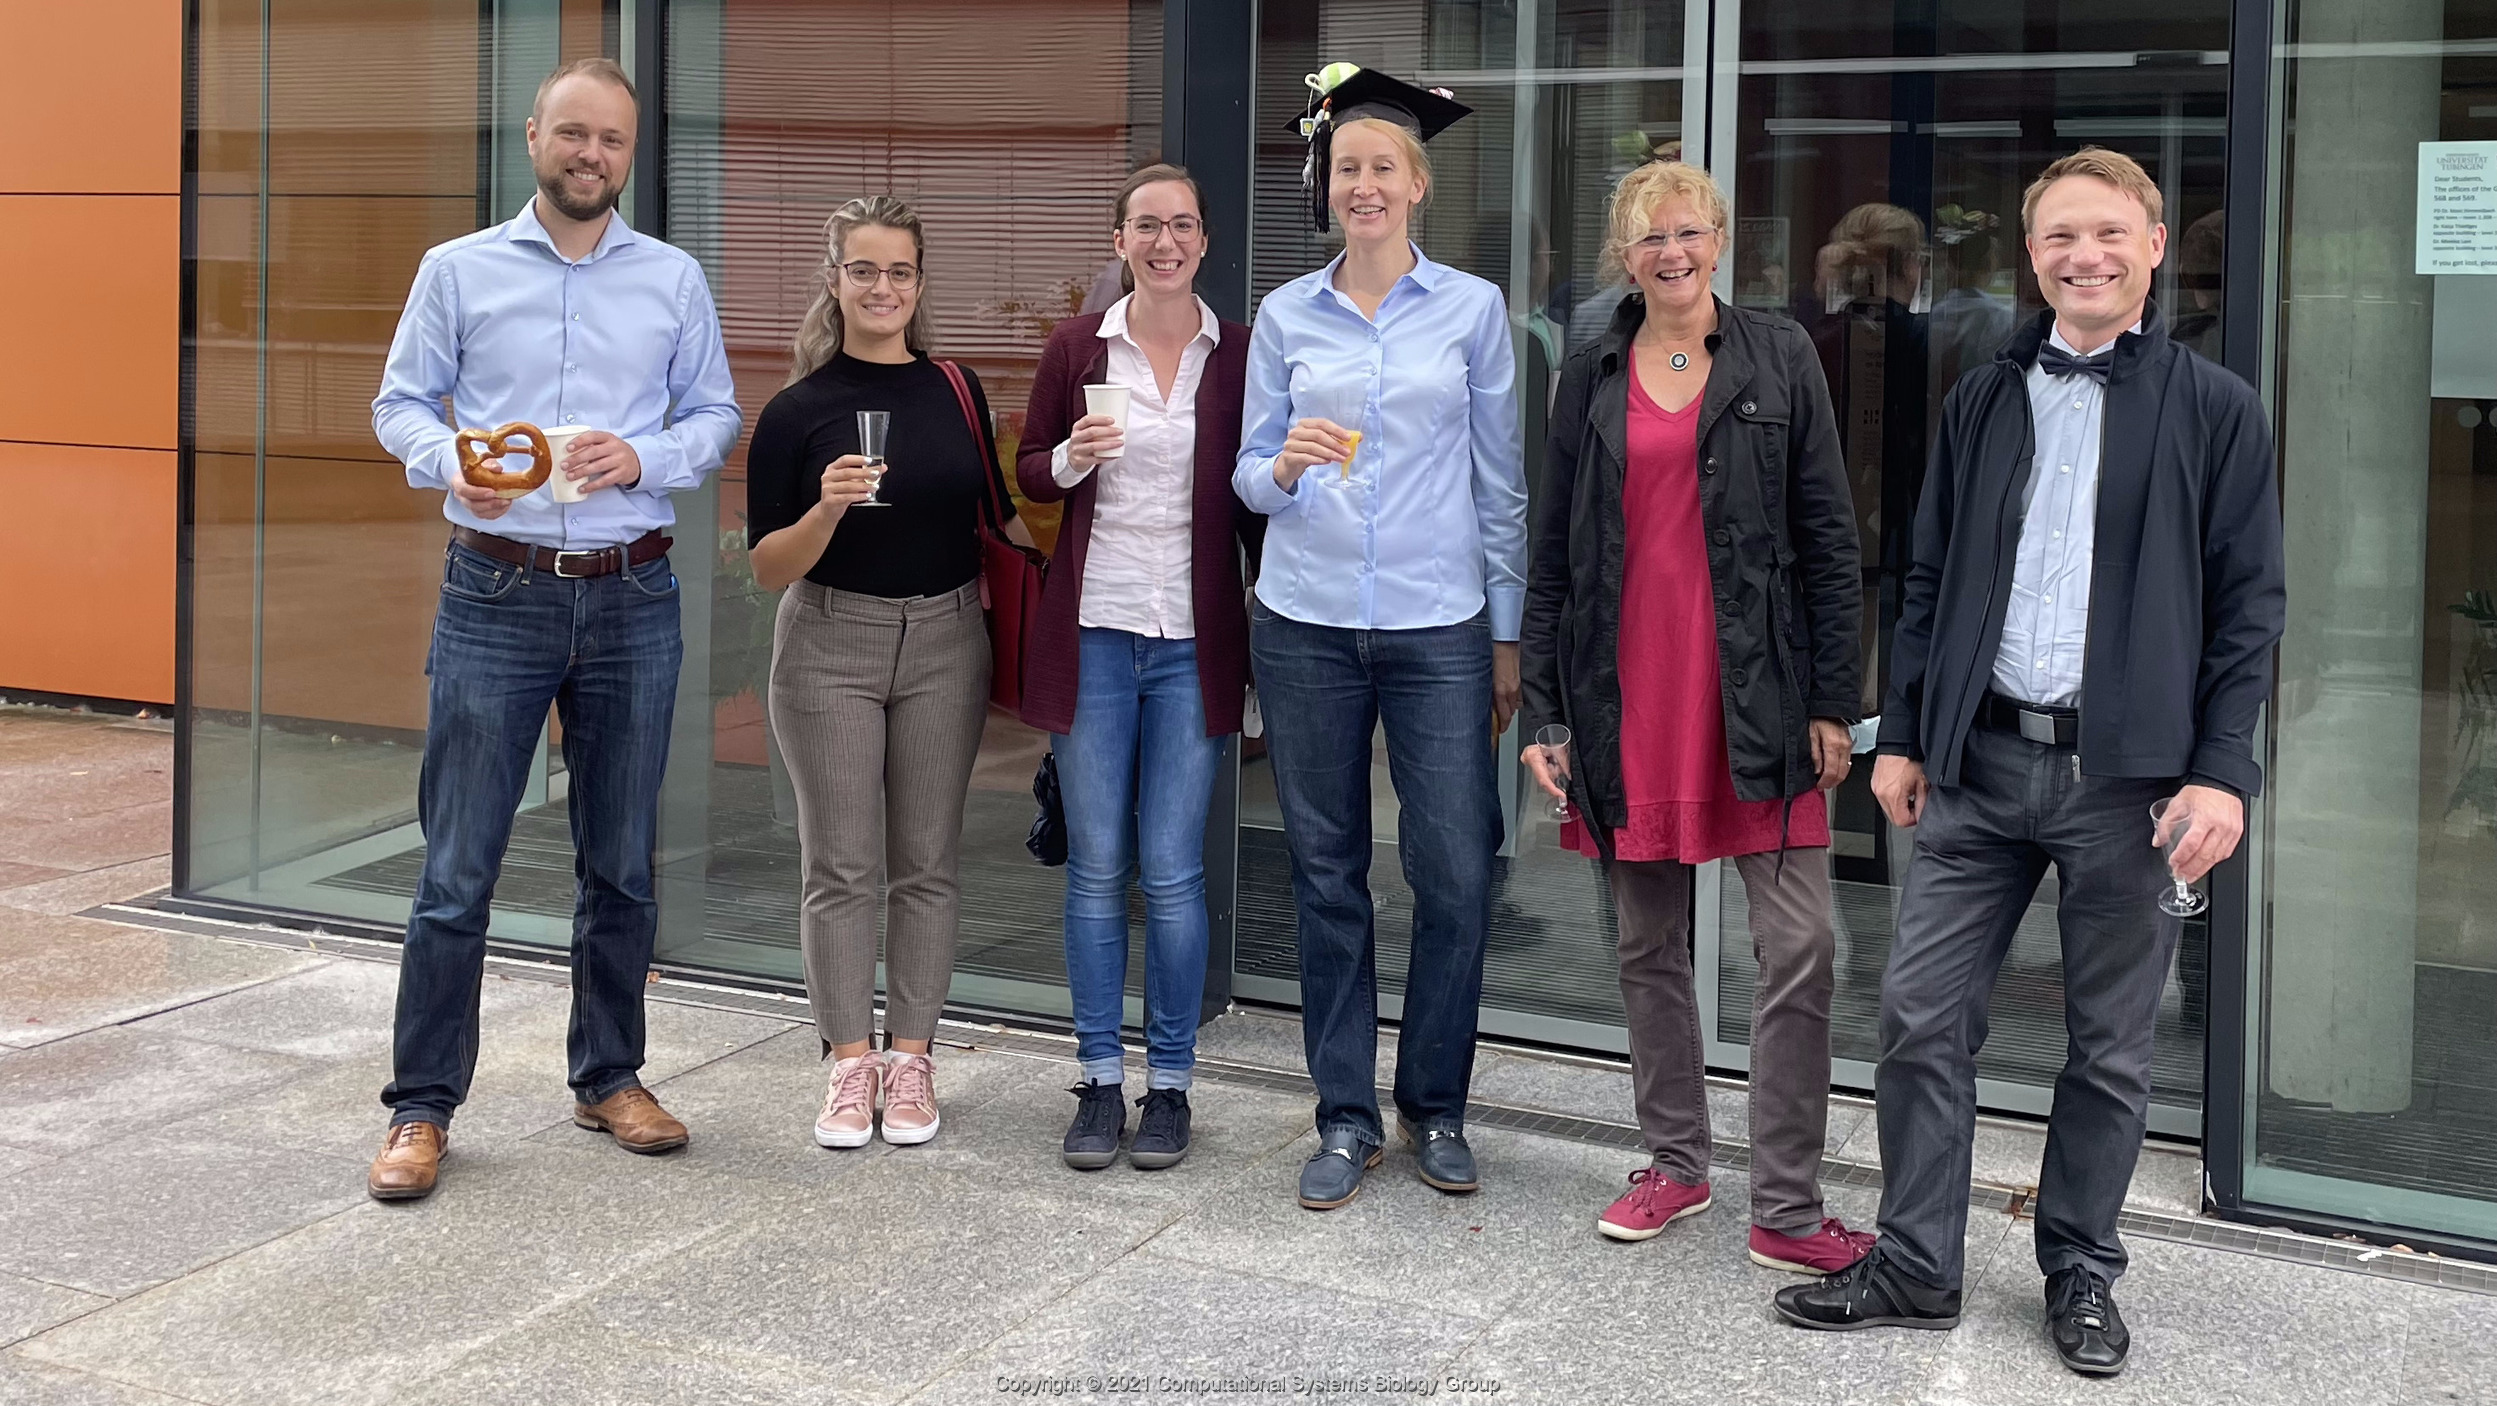 Ph.D. celebration in front of the Hertie-Institute for Clinical Neuroscience